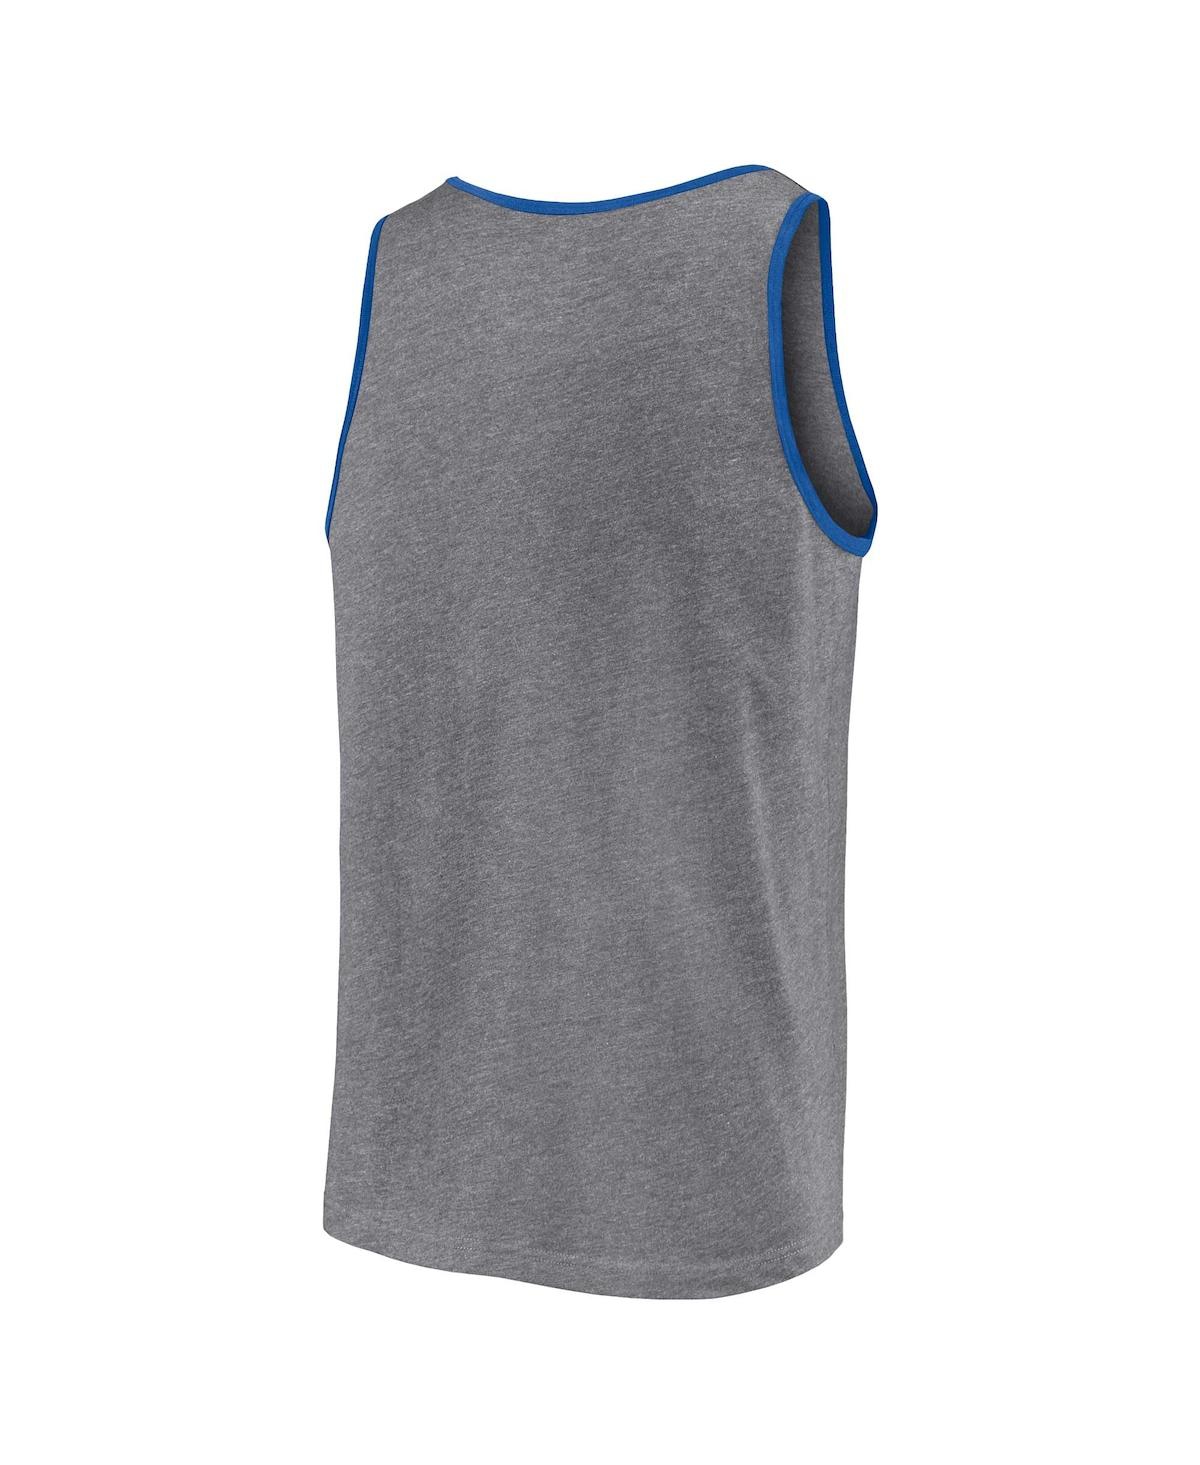 Chicago Cubs Profile Big & Tall Arch Over Logo Tank Top - Heather Charcoal